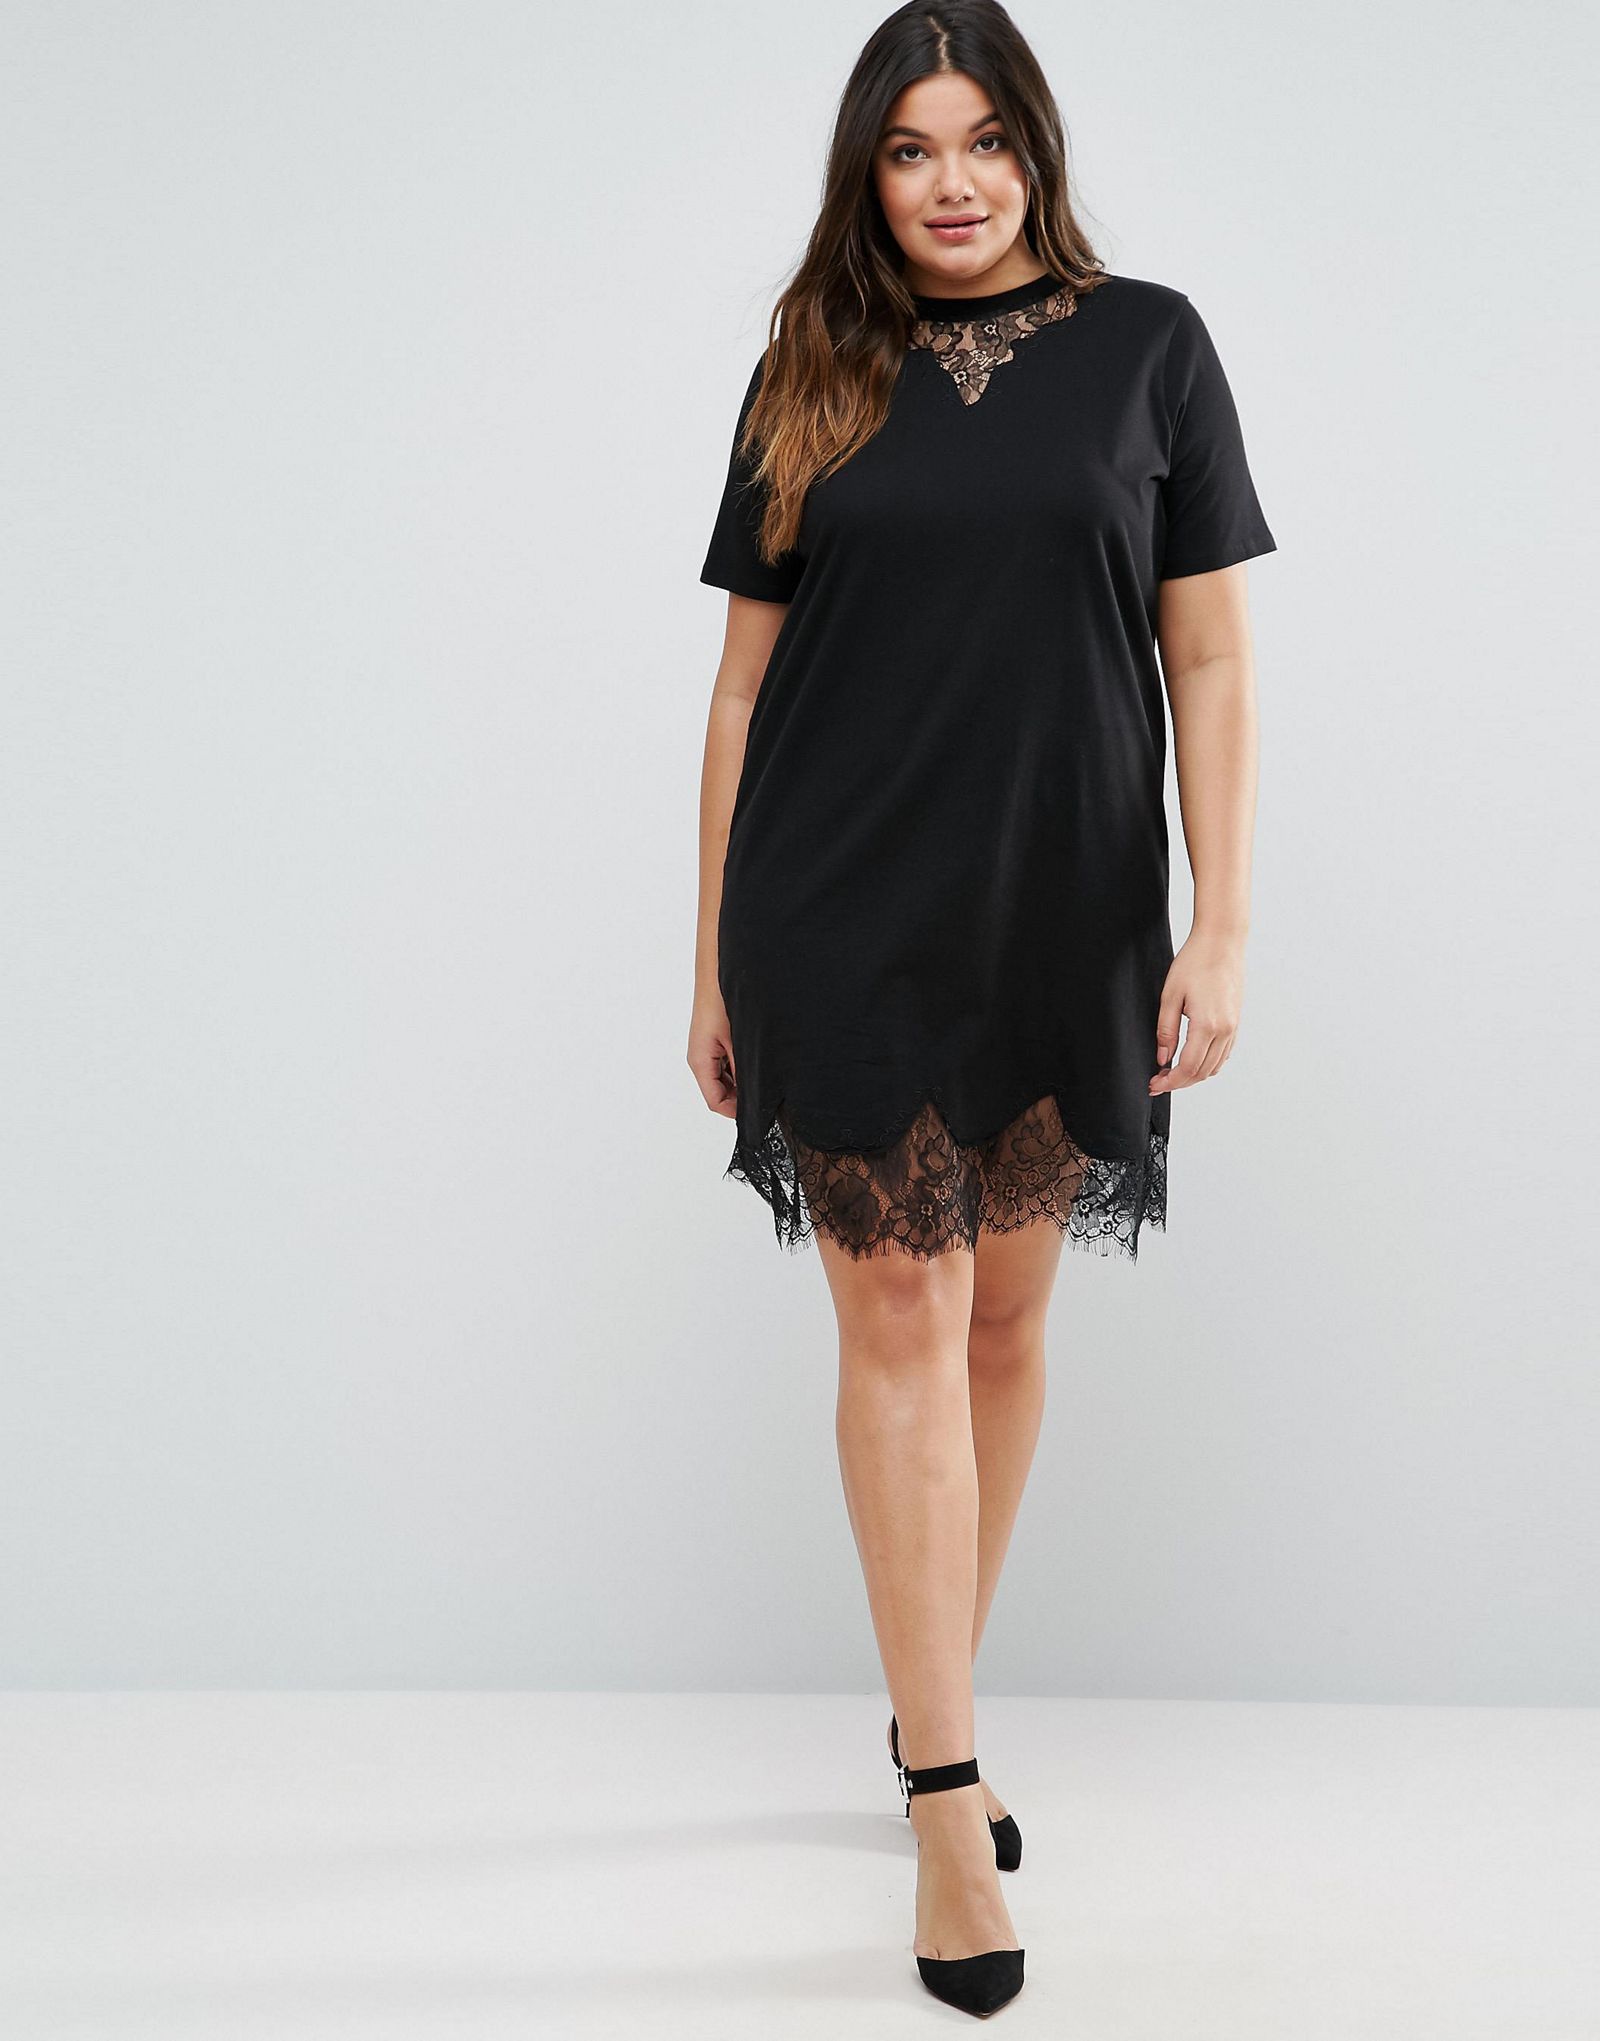 ASOS CURVE T-Shirt Dress with Lace Inserts